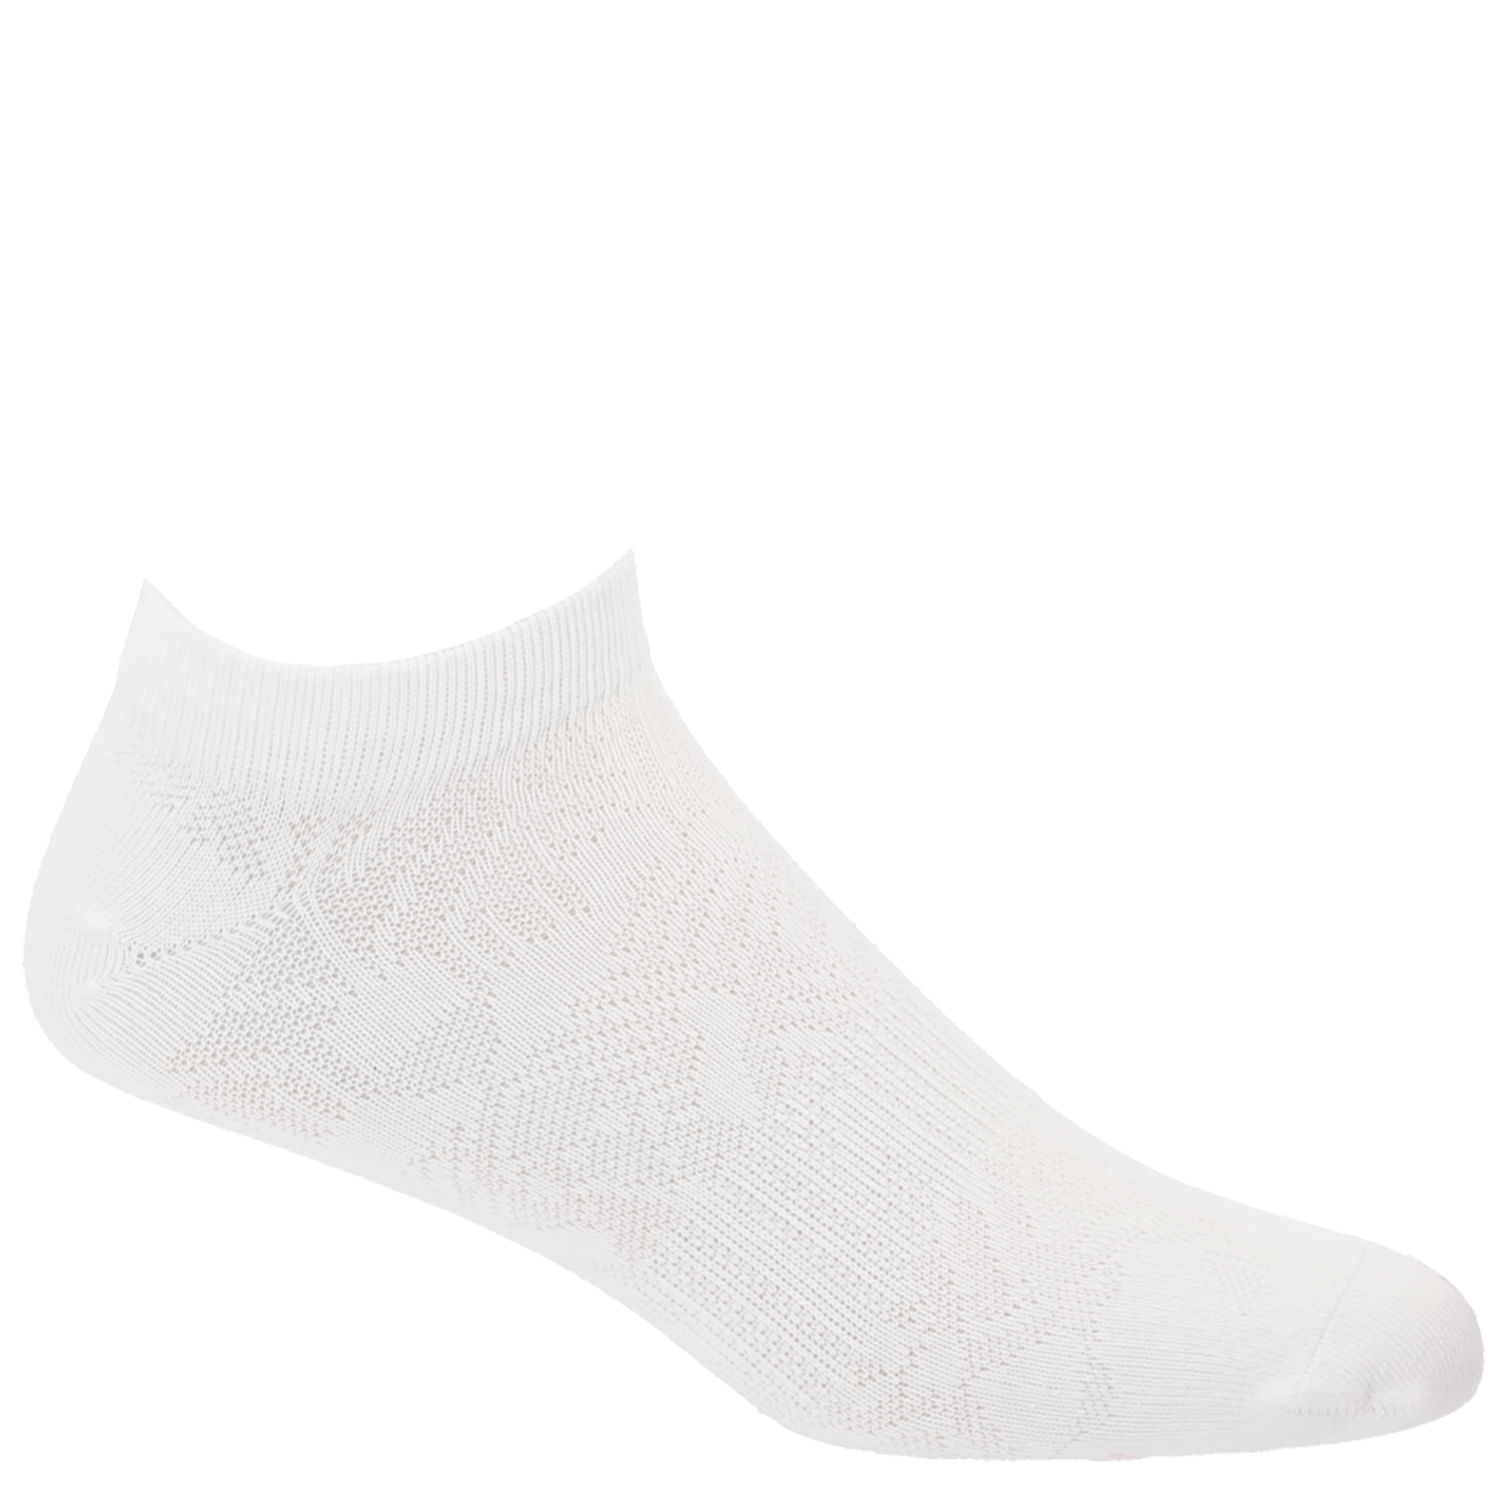 Pack 3 Calcetines Mujer Antiolor Deportivo Blanco - Sutran Technology